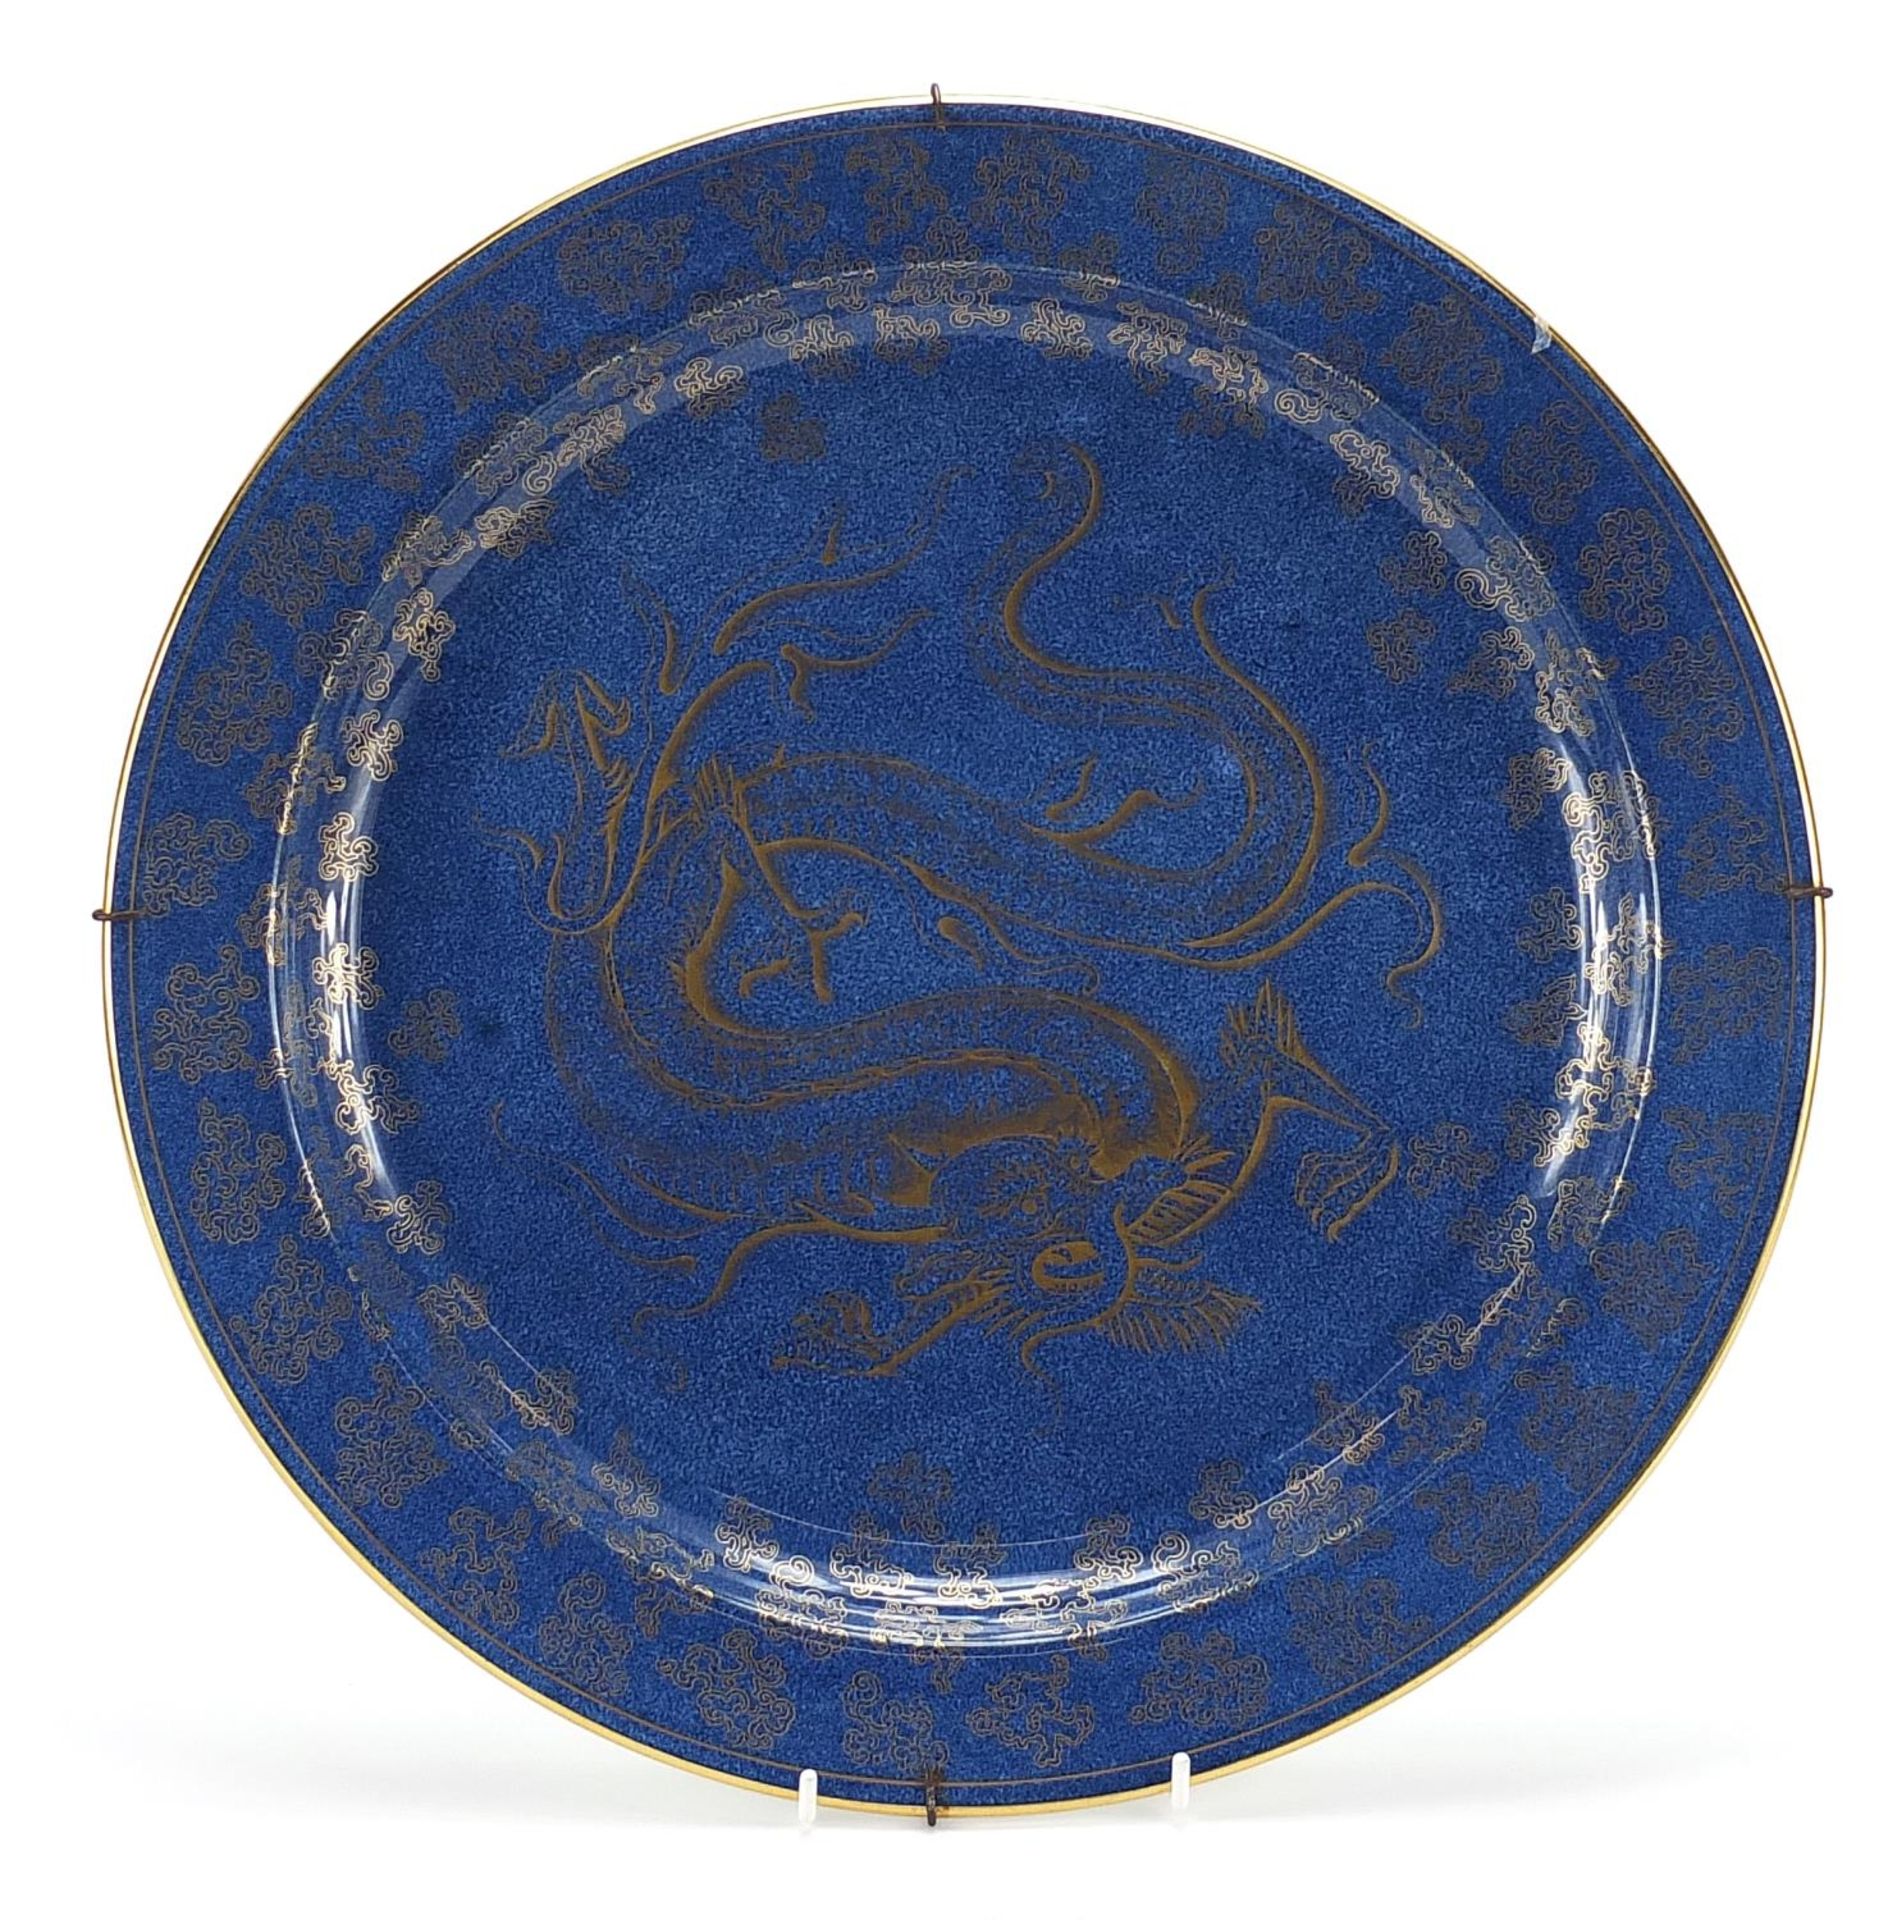 Wedgwood lustre charger hand painted with dragons, 38cm in diameter